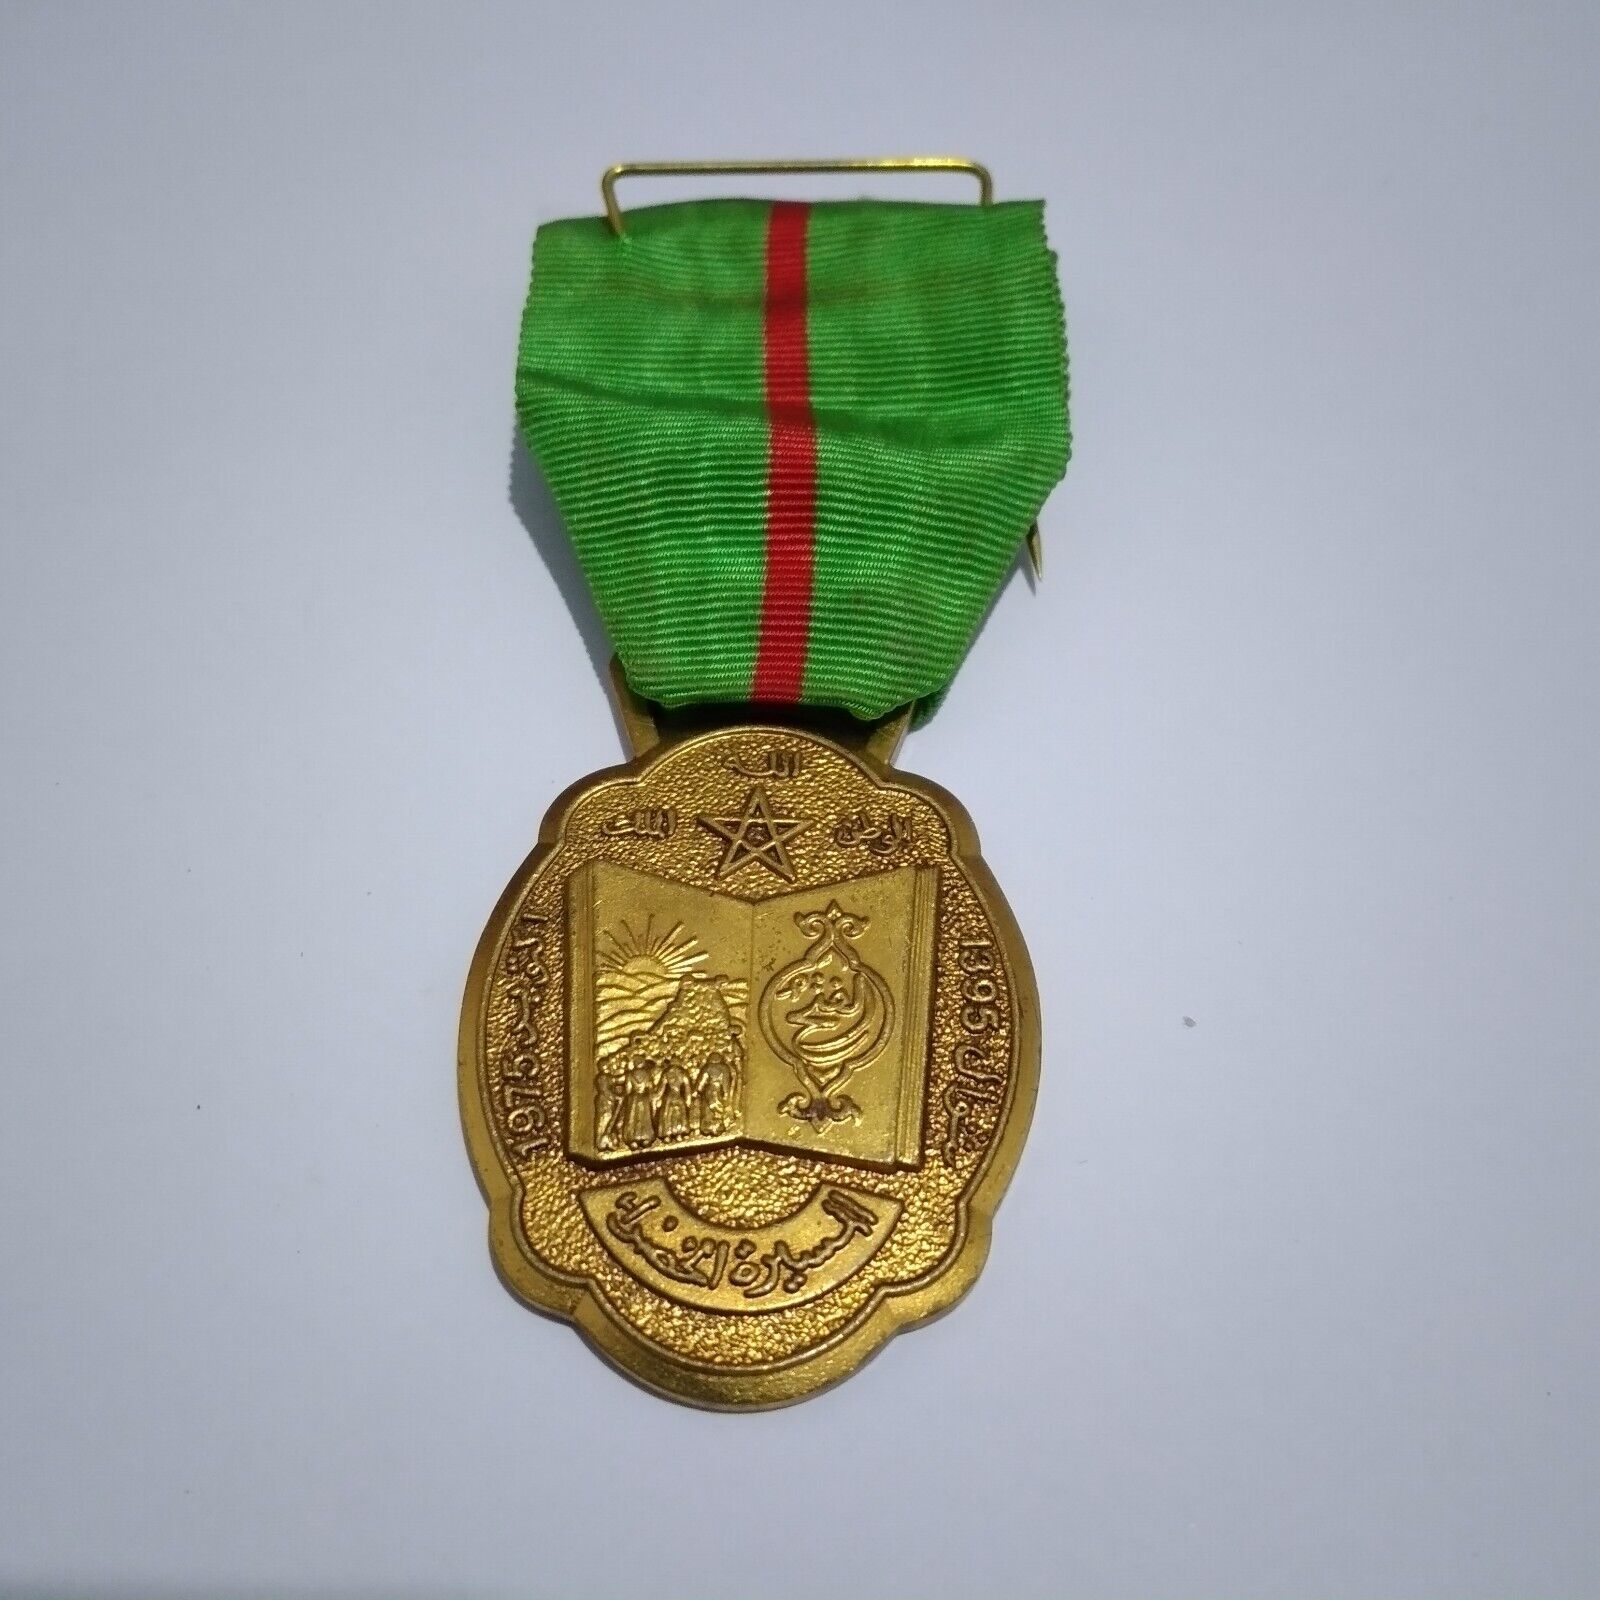 Moroccan Rare VTG Medal 1975 Green March Decoration With Original Ribbon Hassan